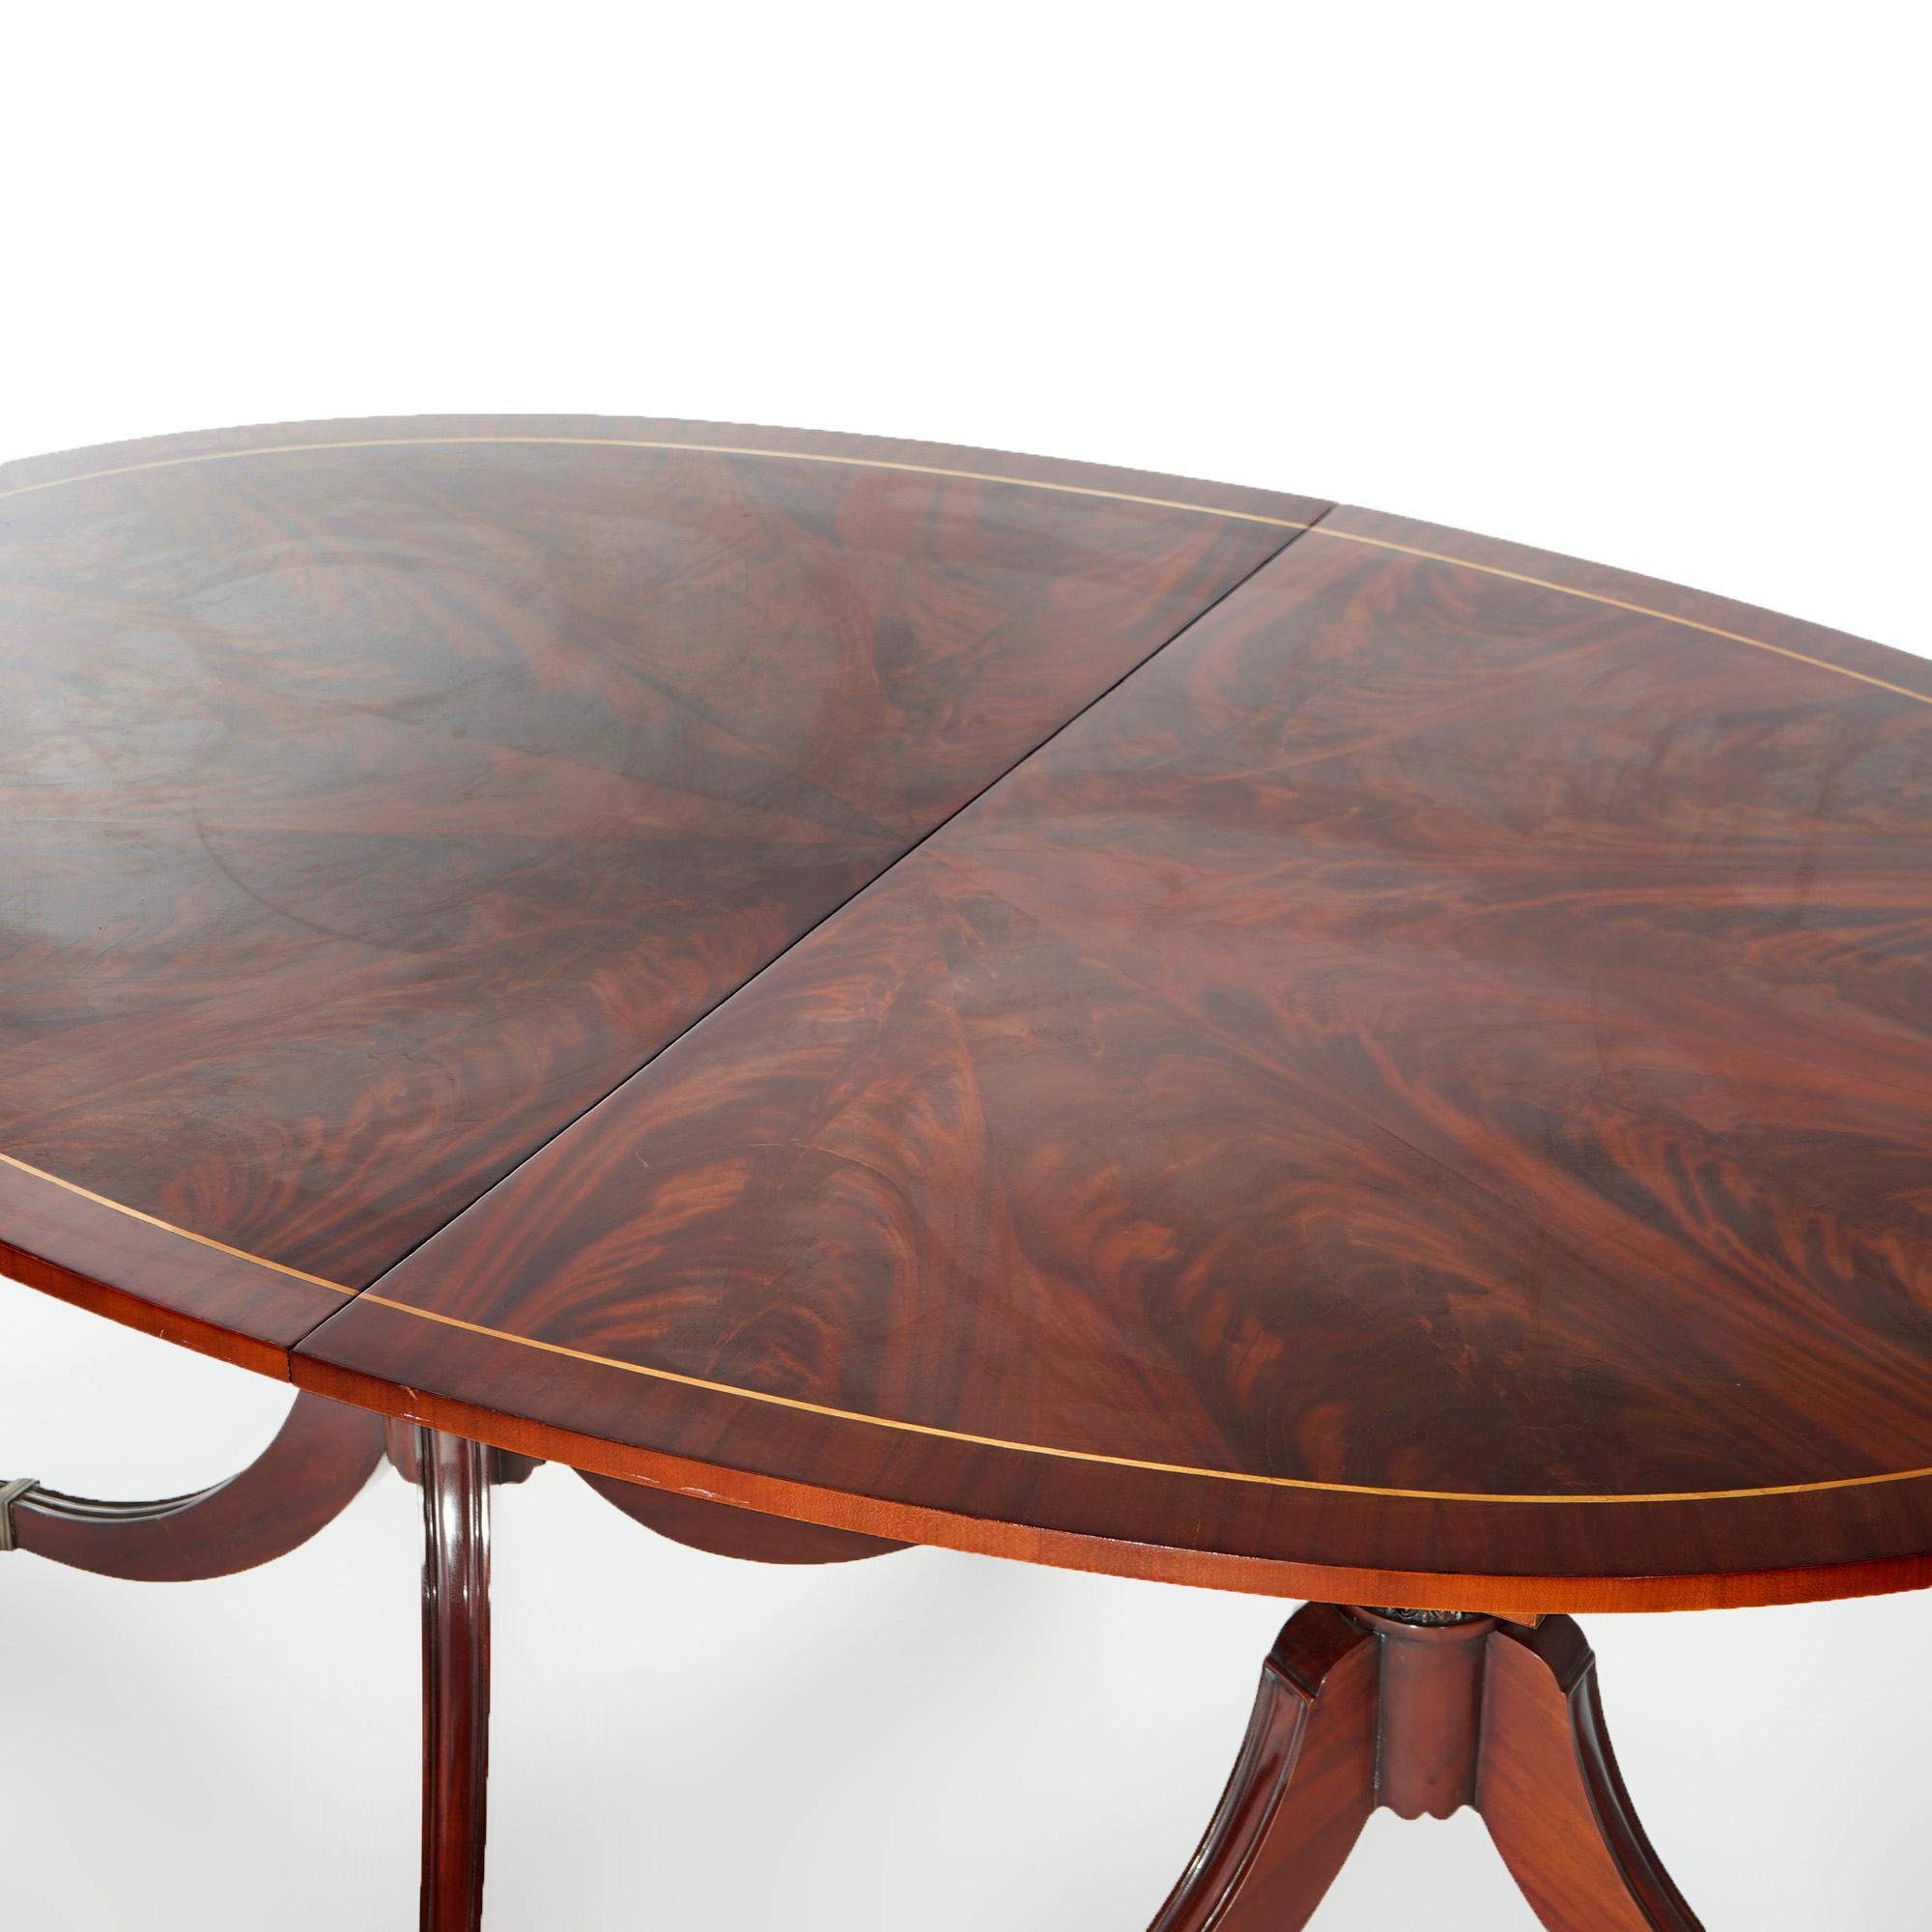 Sheraton Duncan Phyfe Flame Mahogany Banded Double Pedestal Dining Table & Leaves 20th C